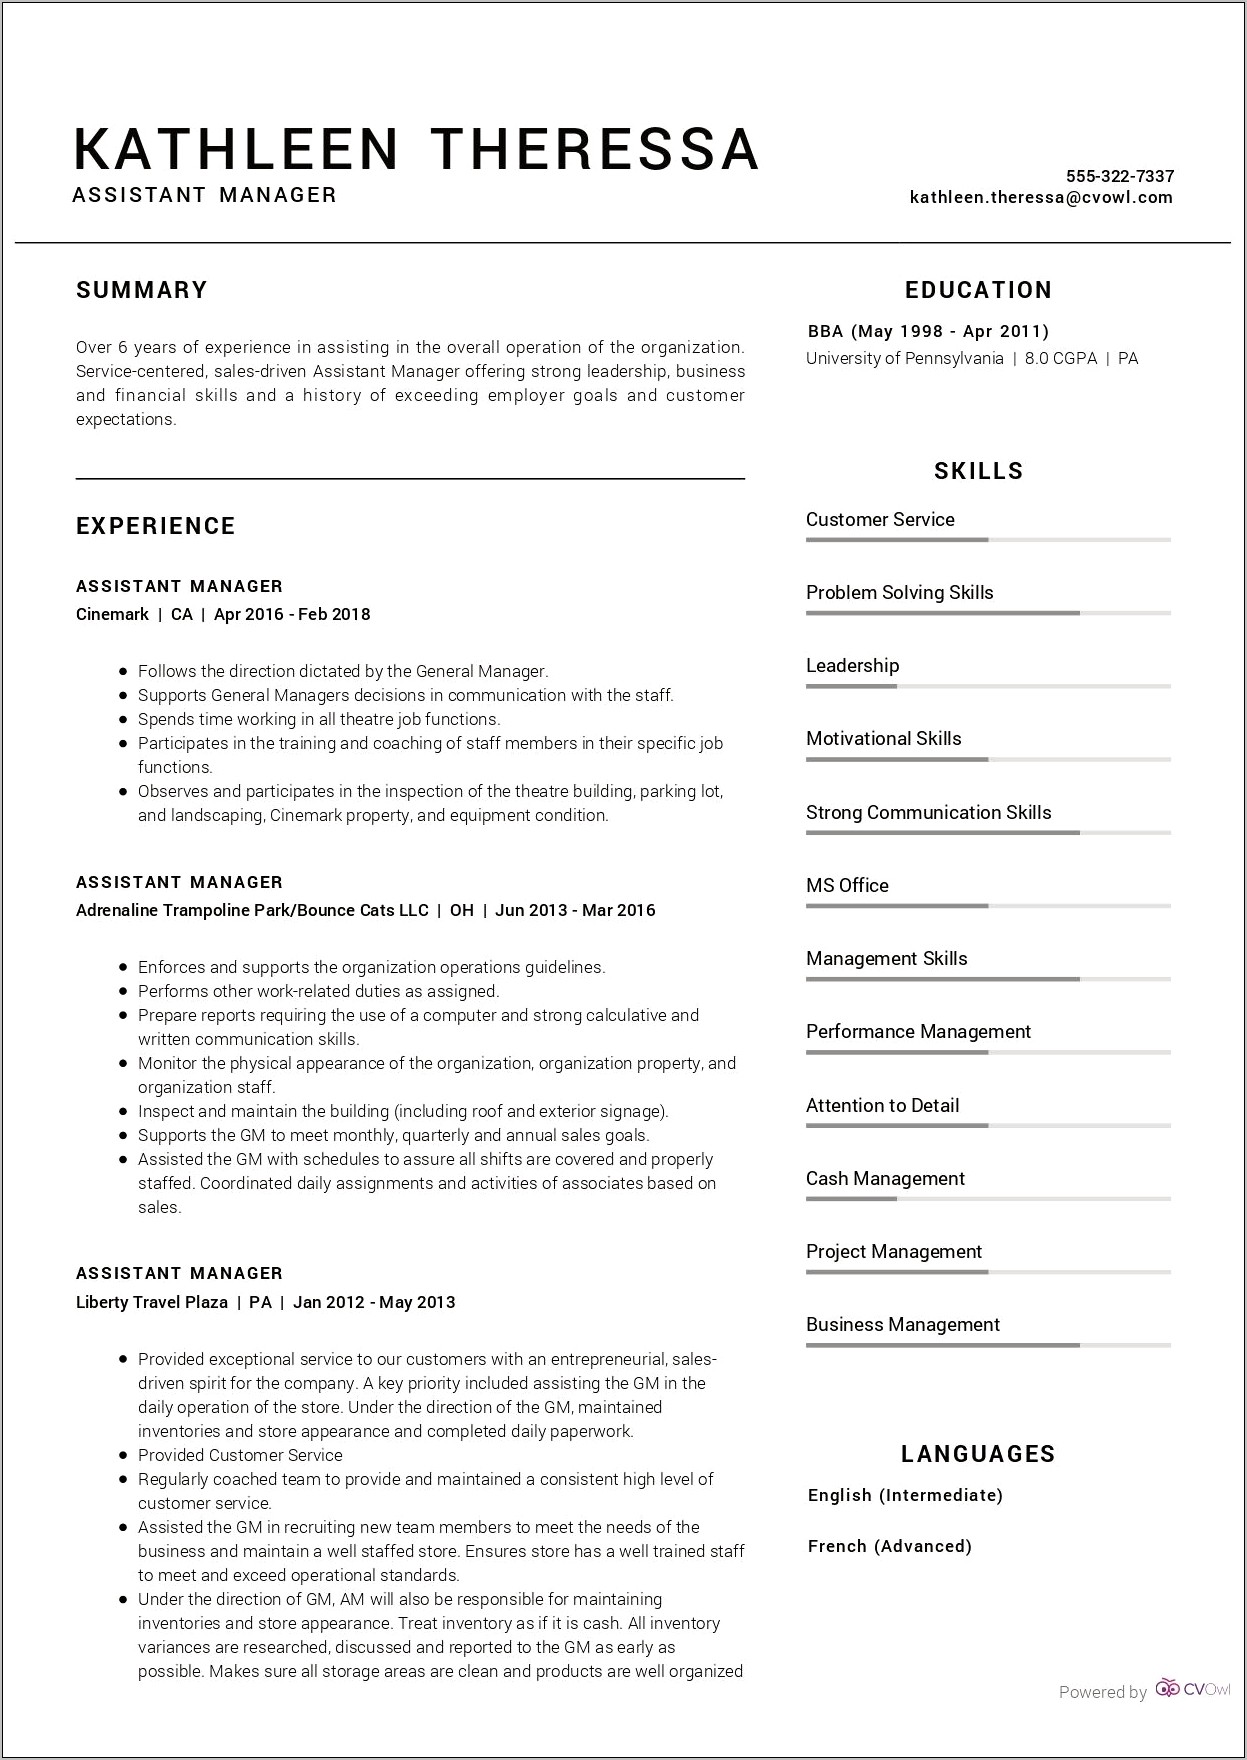 Assistant Manager Descriptions For A Resume